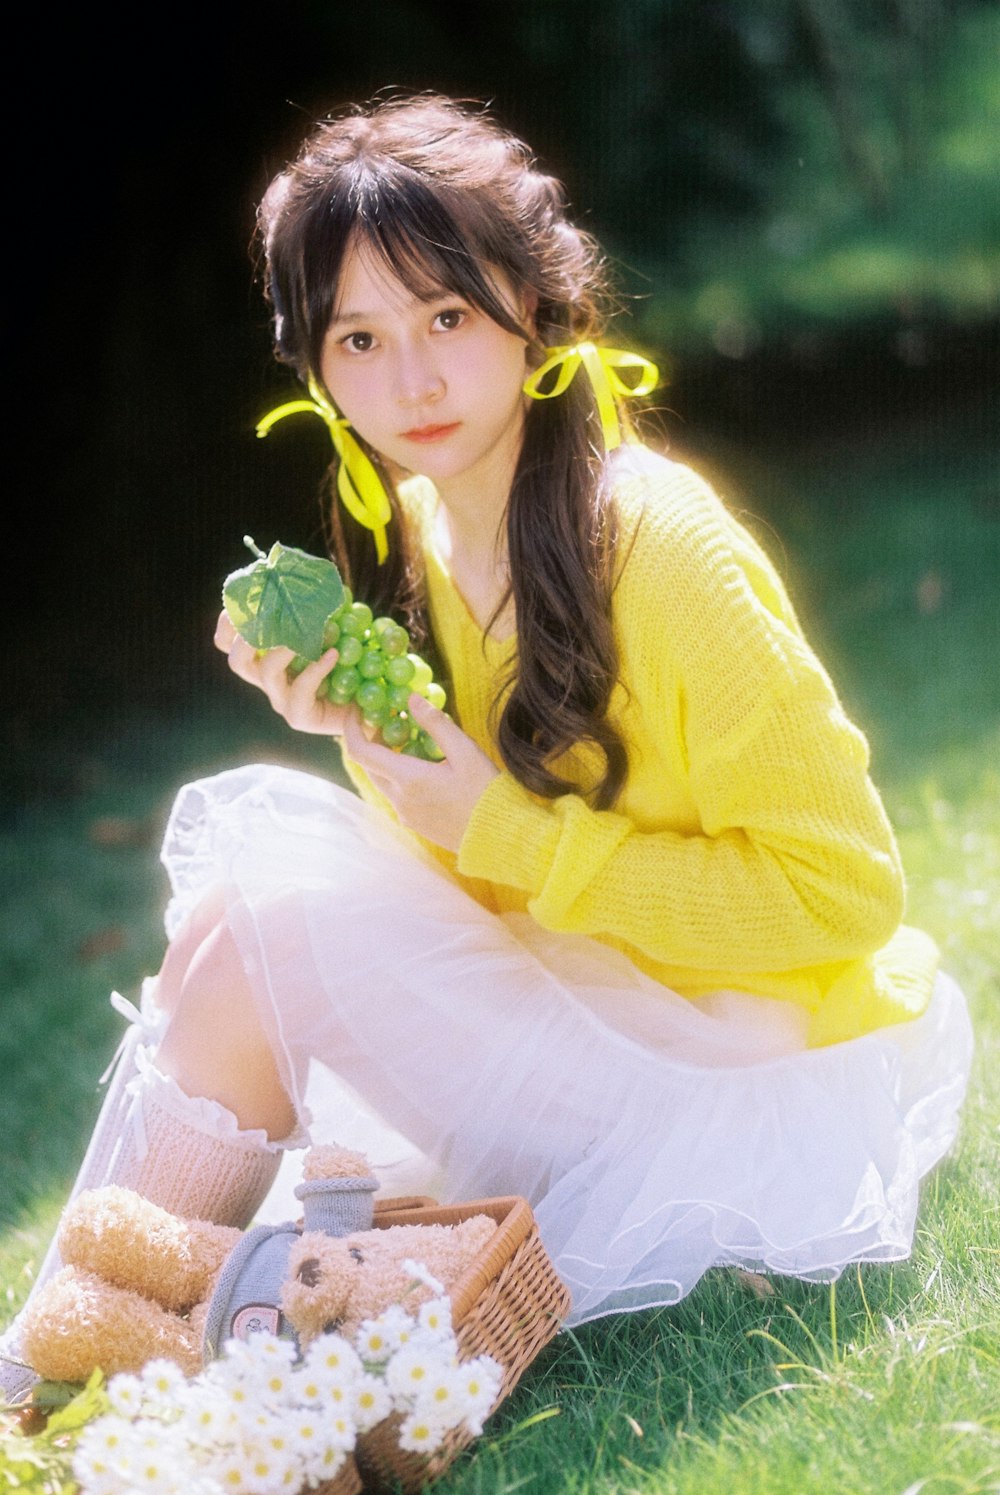 a girl in a yellow sweater and white skirt holding a green leaf